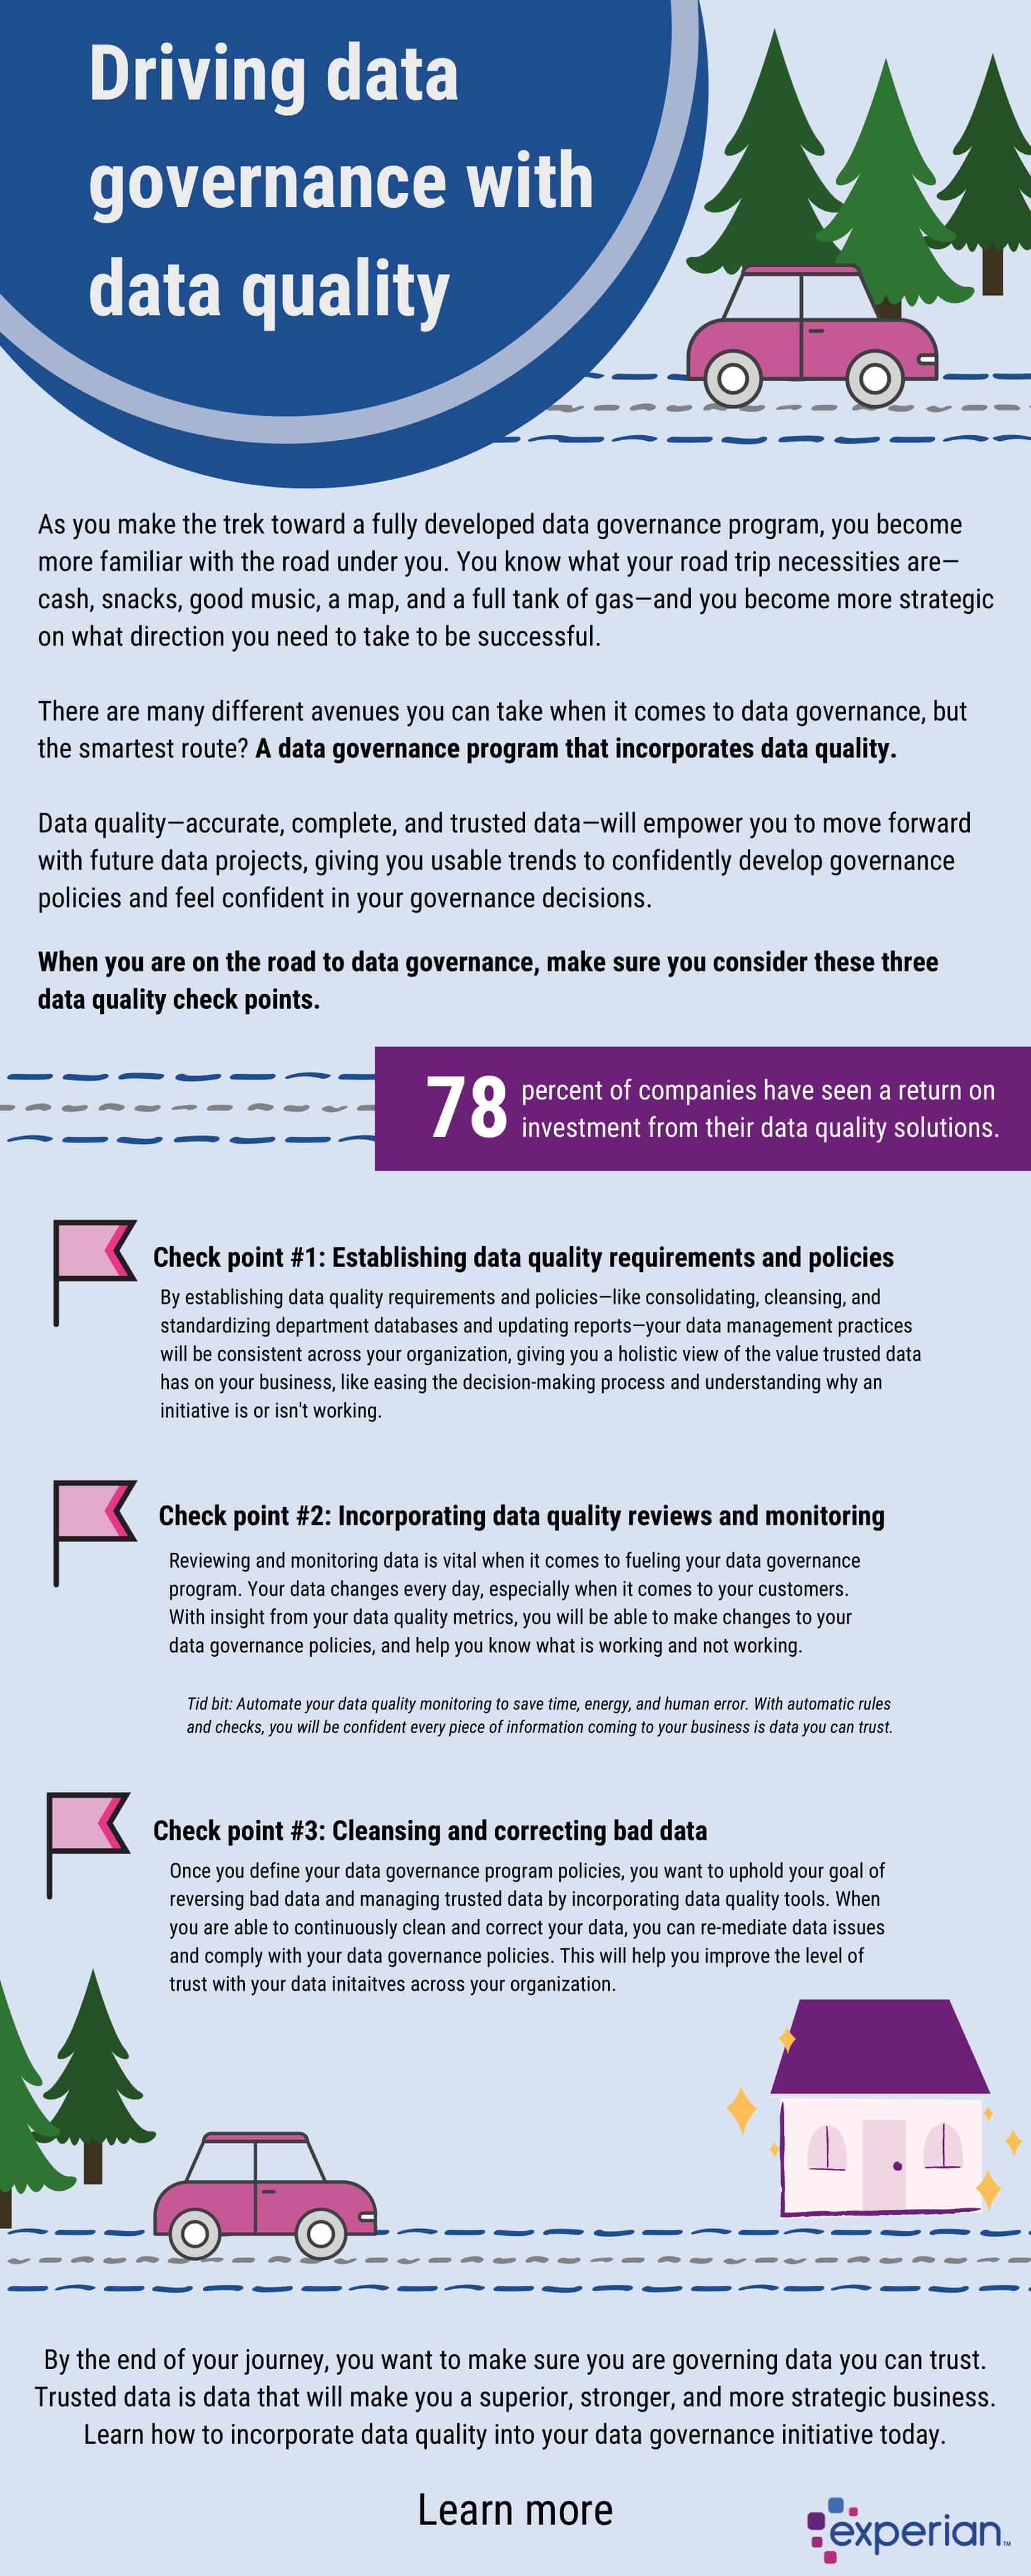 Driving data governance with data quality